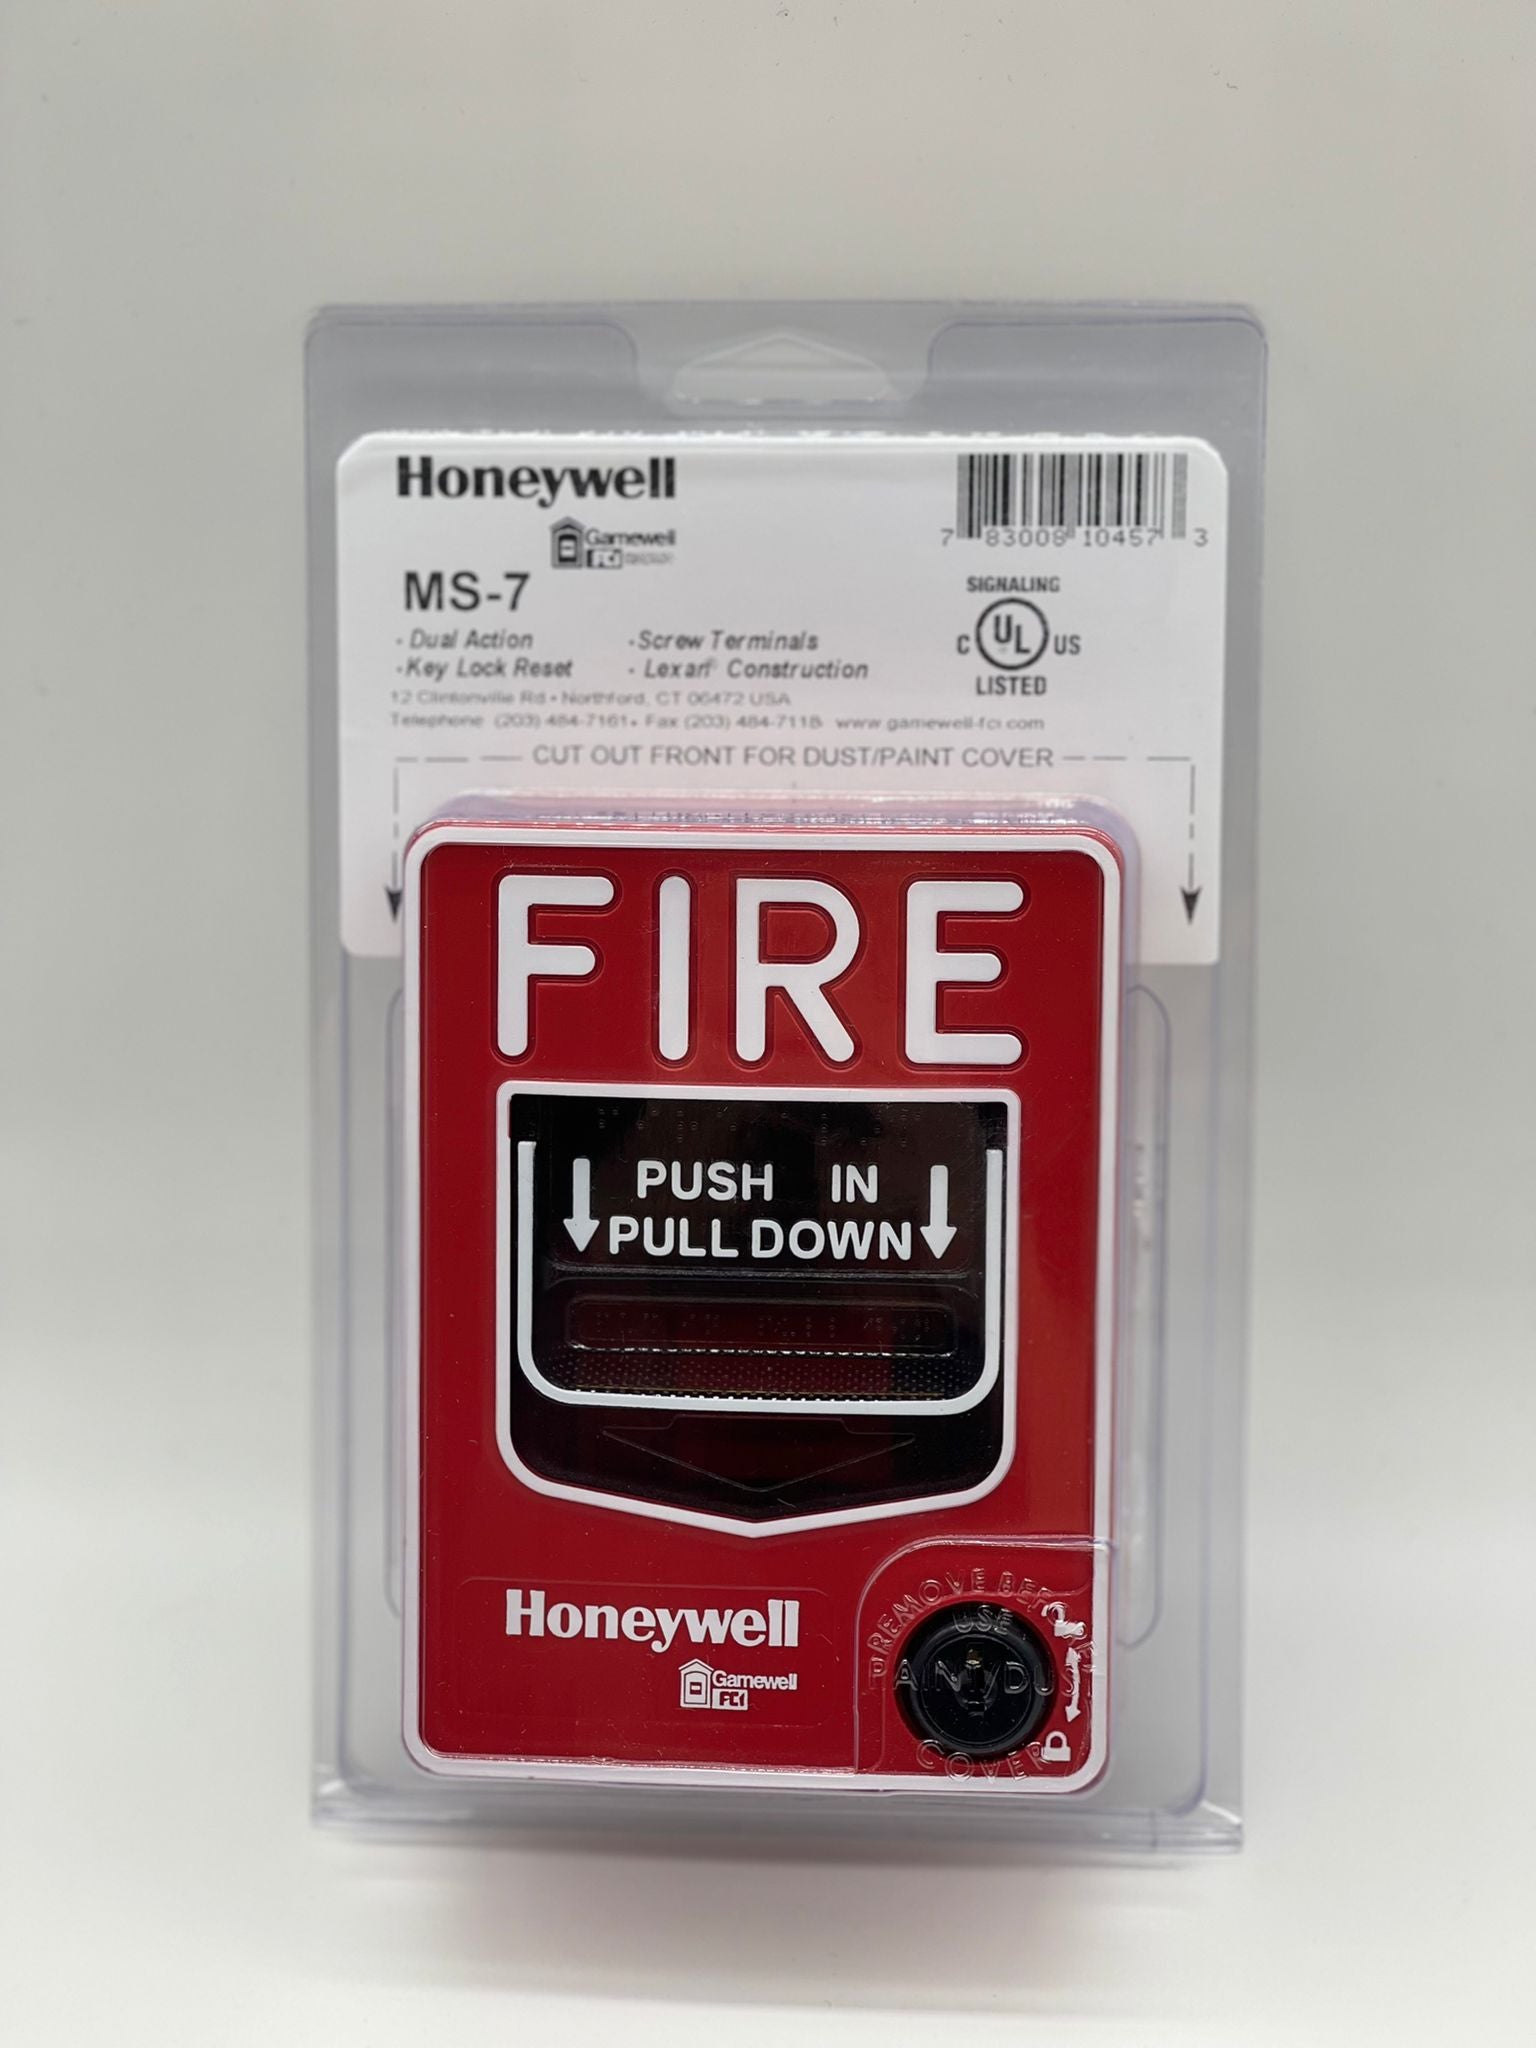 Gamewell-FCI MS-7 - The Fire Alarm Supplier